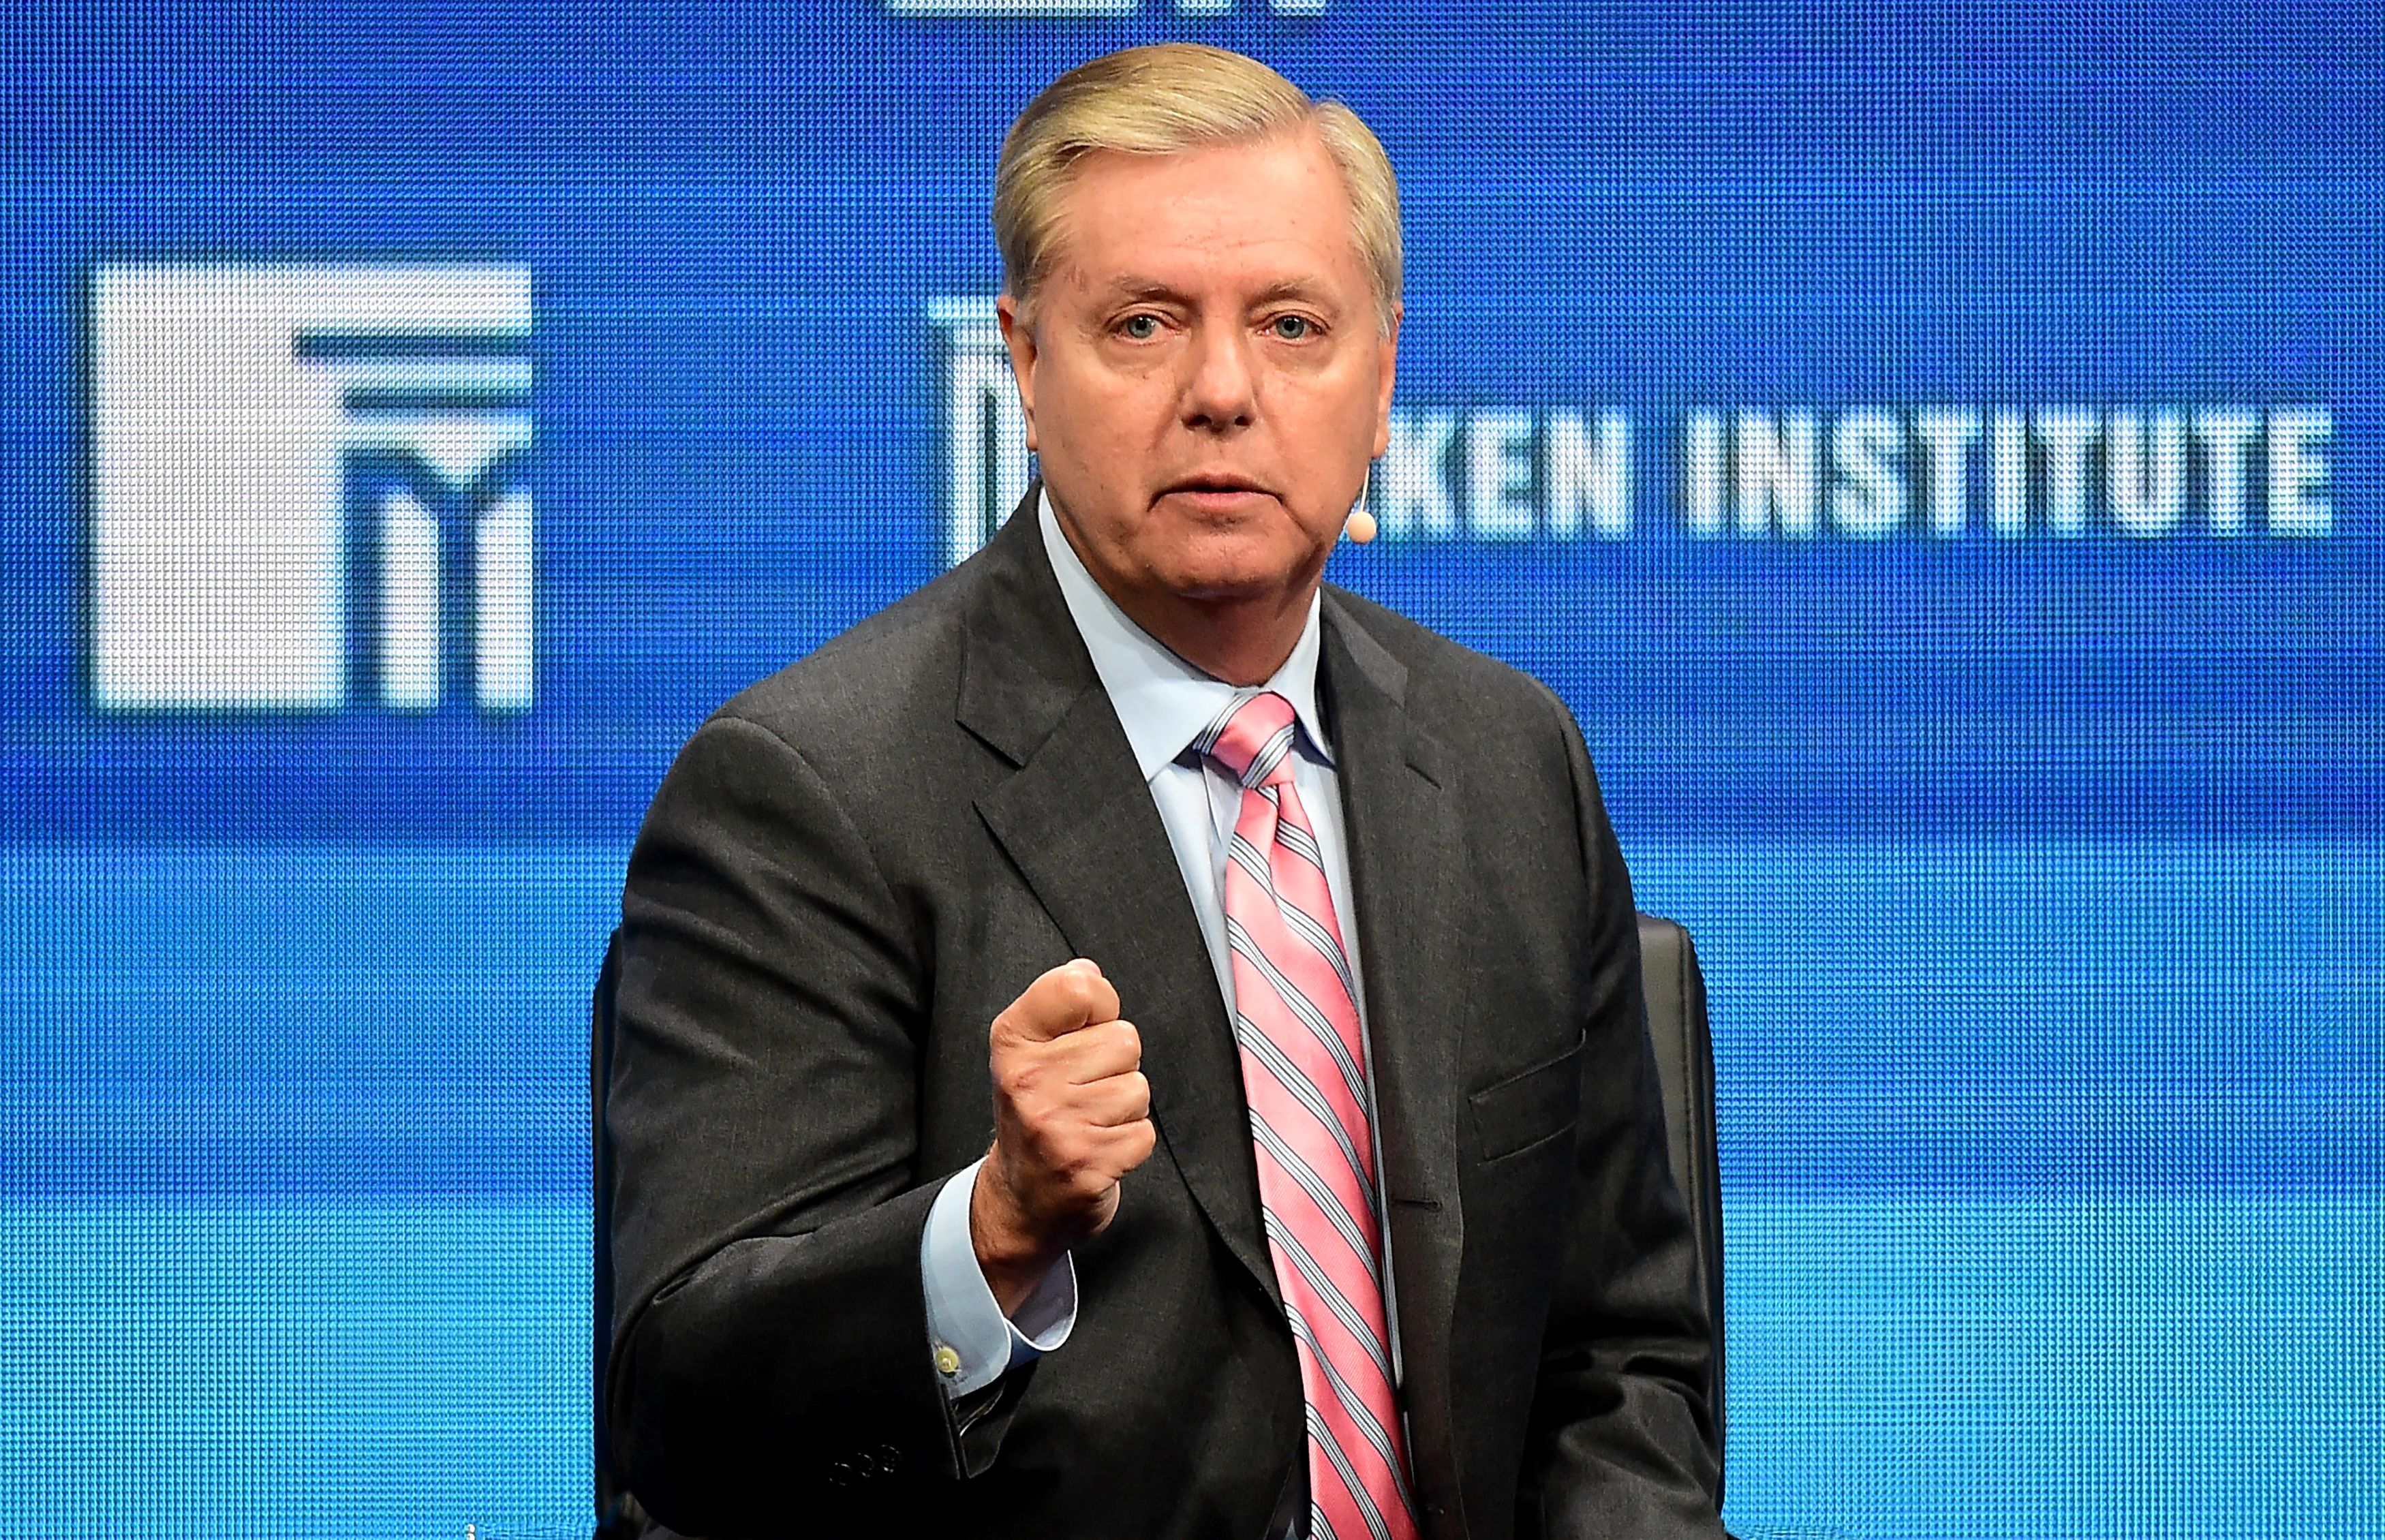 Sen. Lindsay Graham speaks during a panel at the 2016 Milken Institute Global Conference in Beverly Hills, California on May 3. (Frederic J. Brown—AFP/Getty Images)